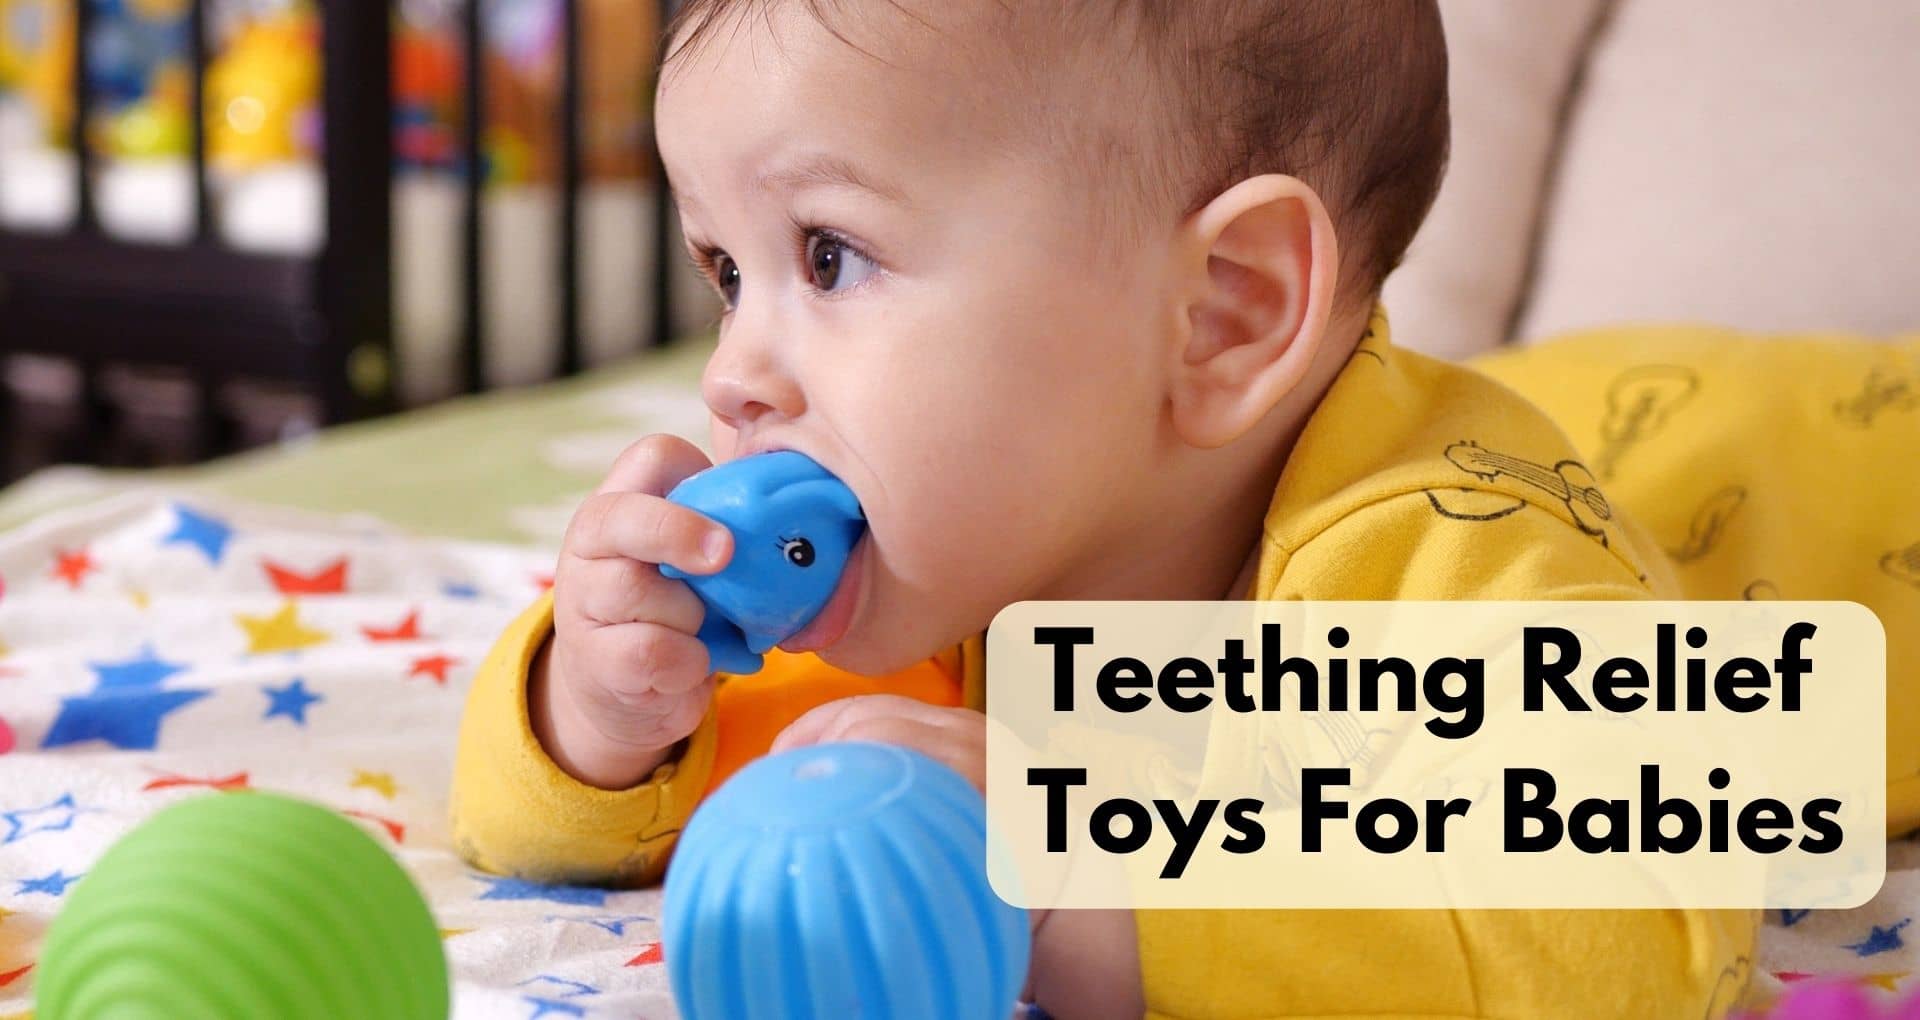 Teething Relief Toys for Babies